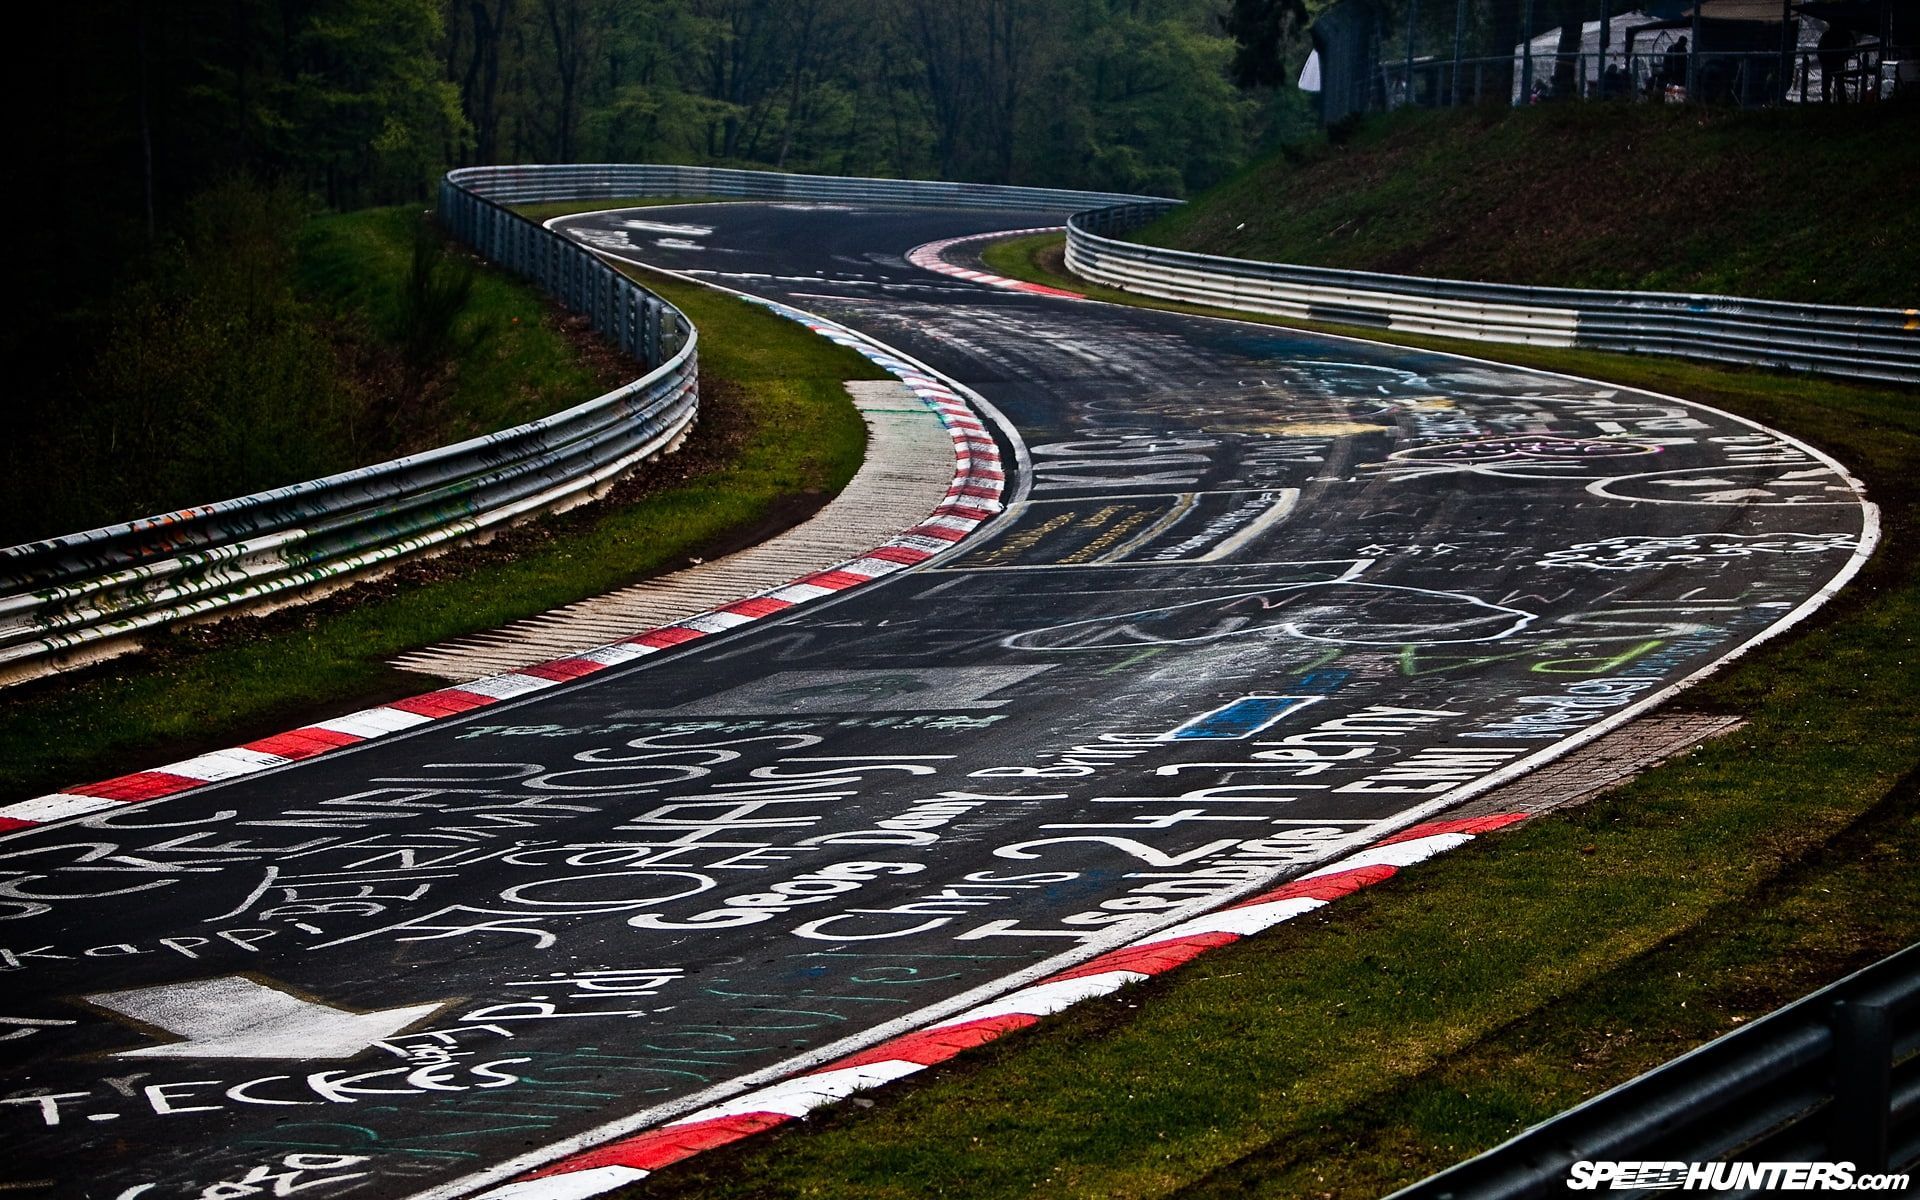 Nurburgring Track Race Track HD #cars #race #track #nurburgring P # wallpaper #hdwallpaper #desktop. Race track, Racing, Track